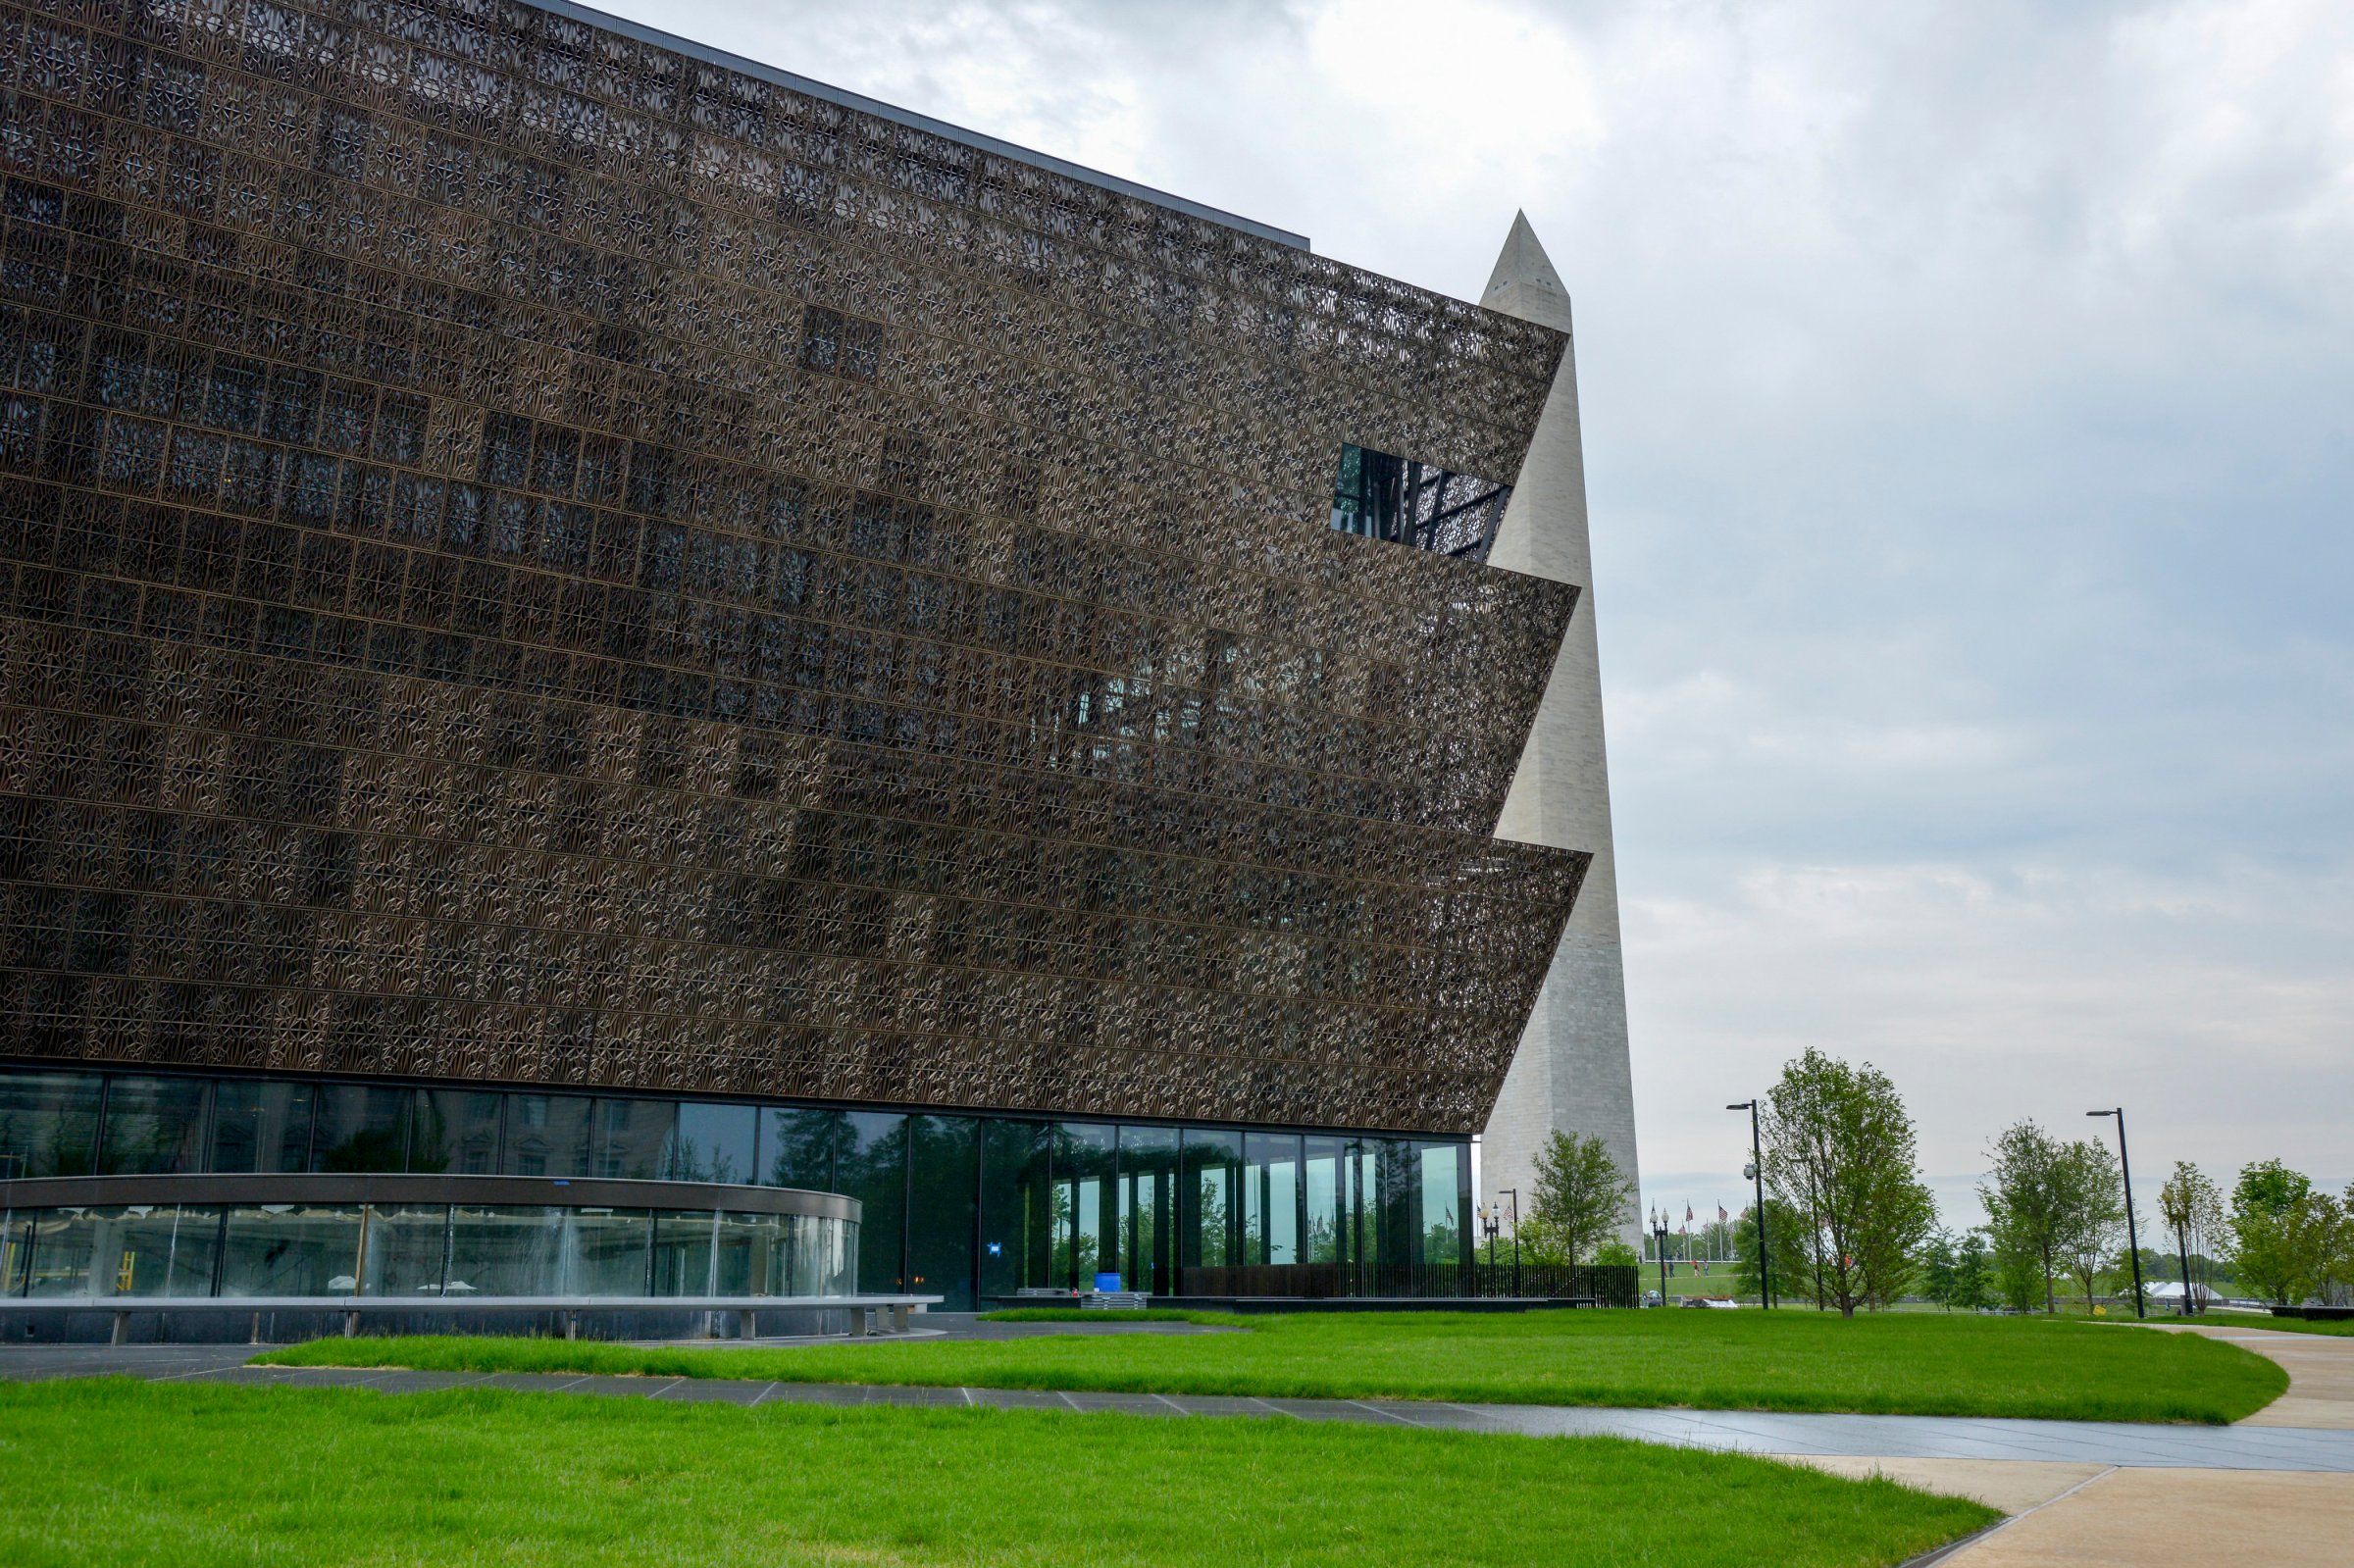 The Smithsonian National Museum of African American History and Culture sits near the Washington Monument on Tuesday, May 10, 2016, in Washington, DC. The Museum will open to the public September 24 of this year, 2016.